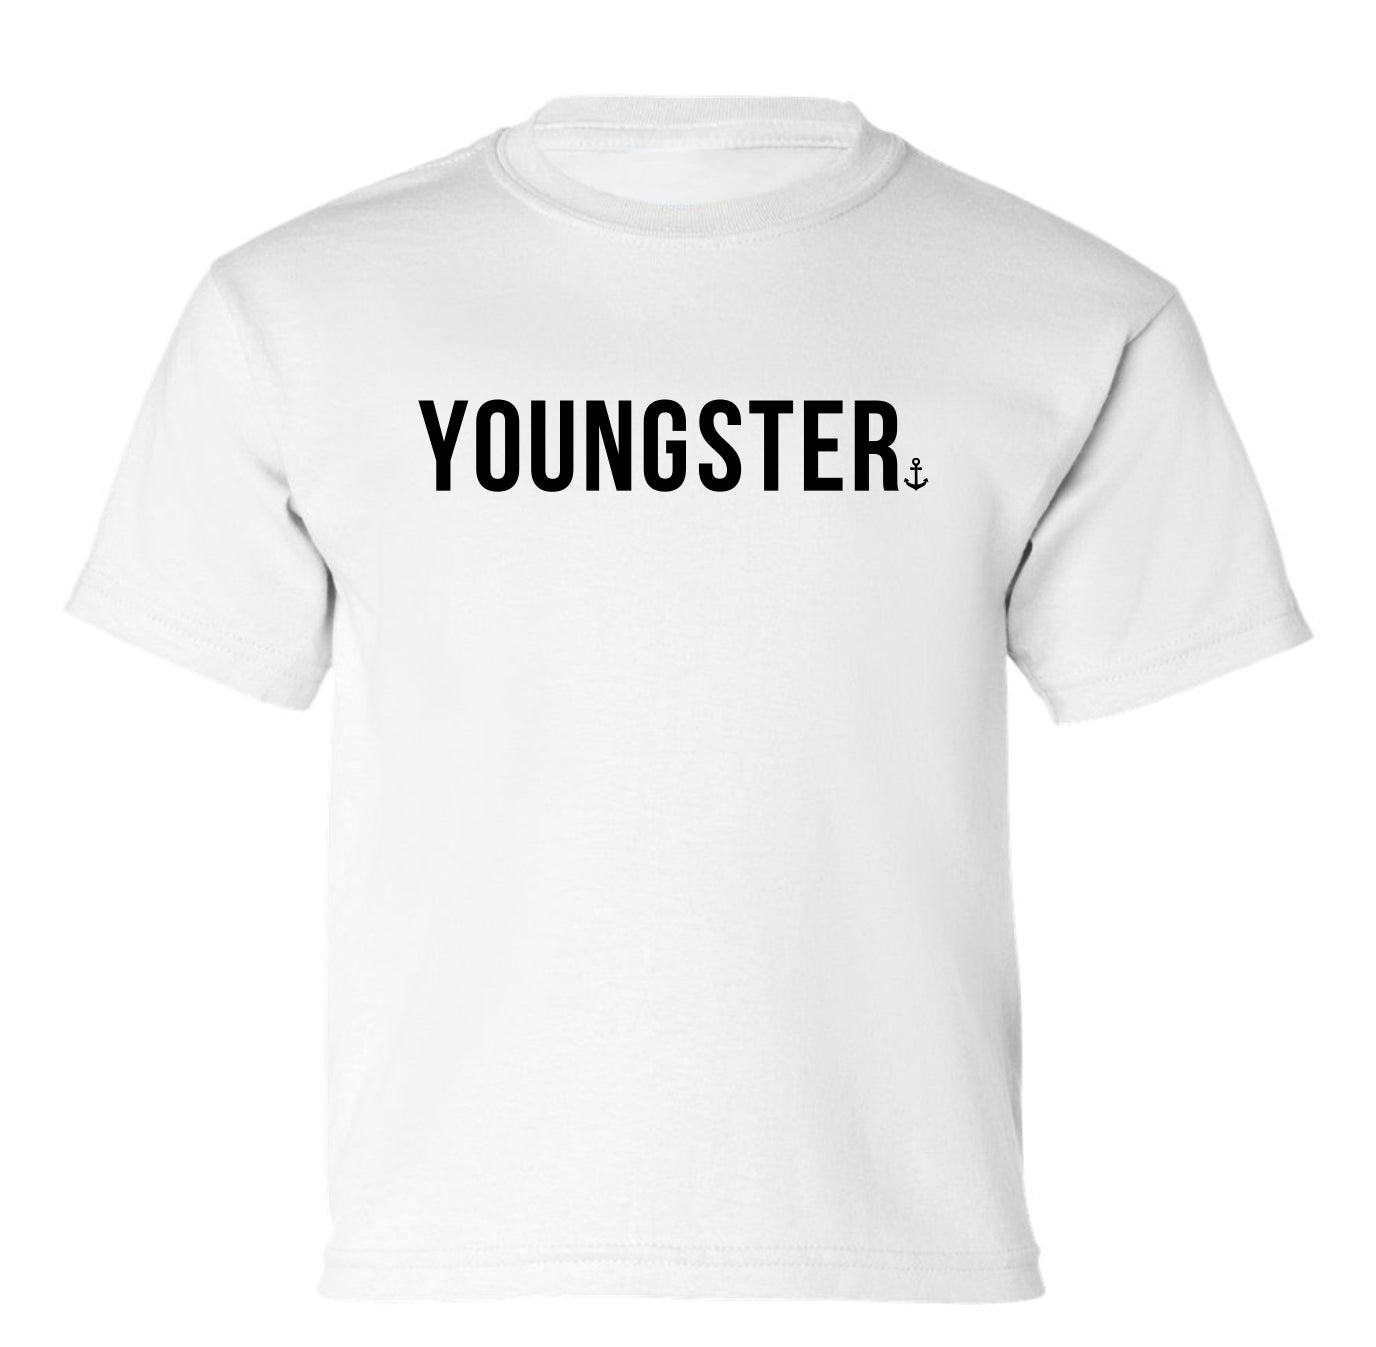 "Youngster" Toddler/Youth T-Shirt